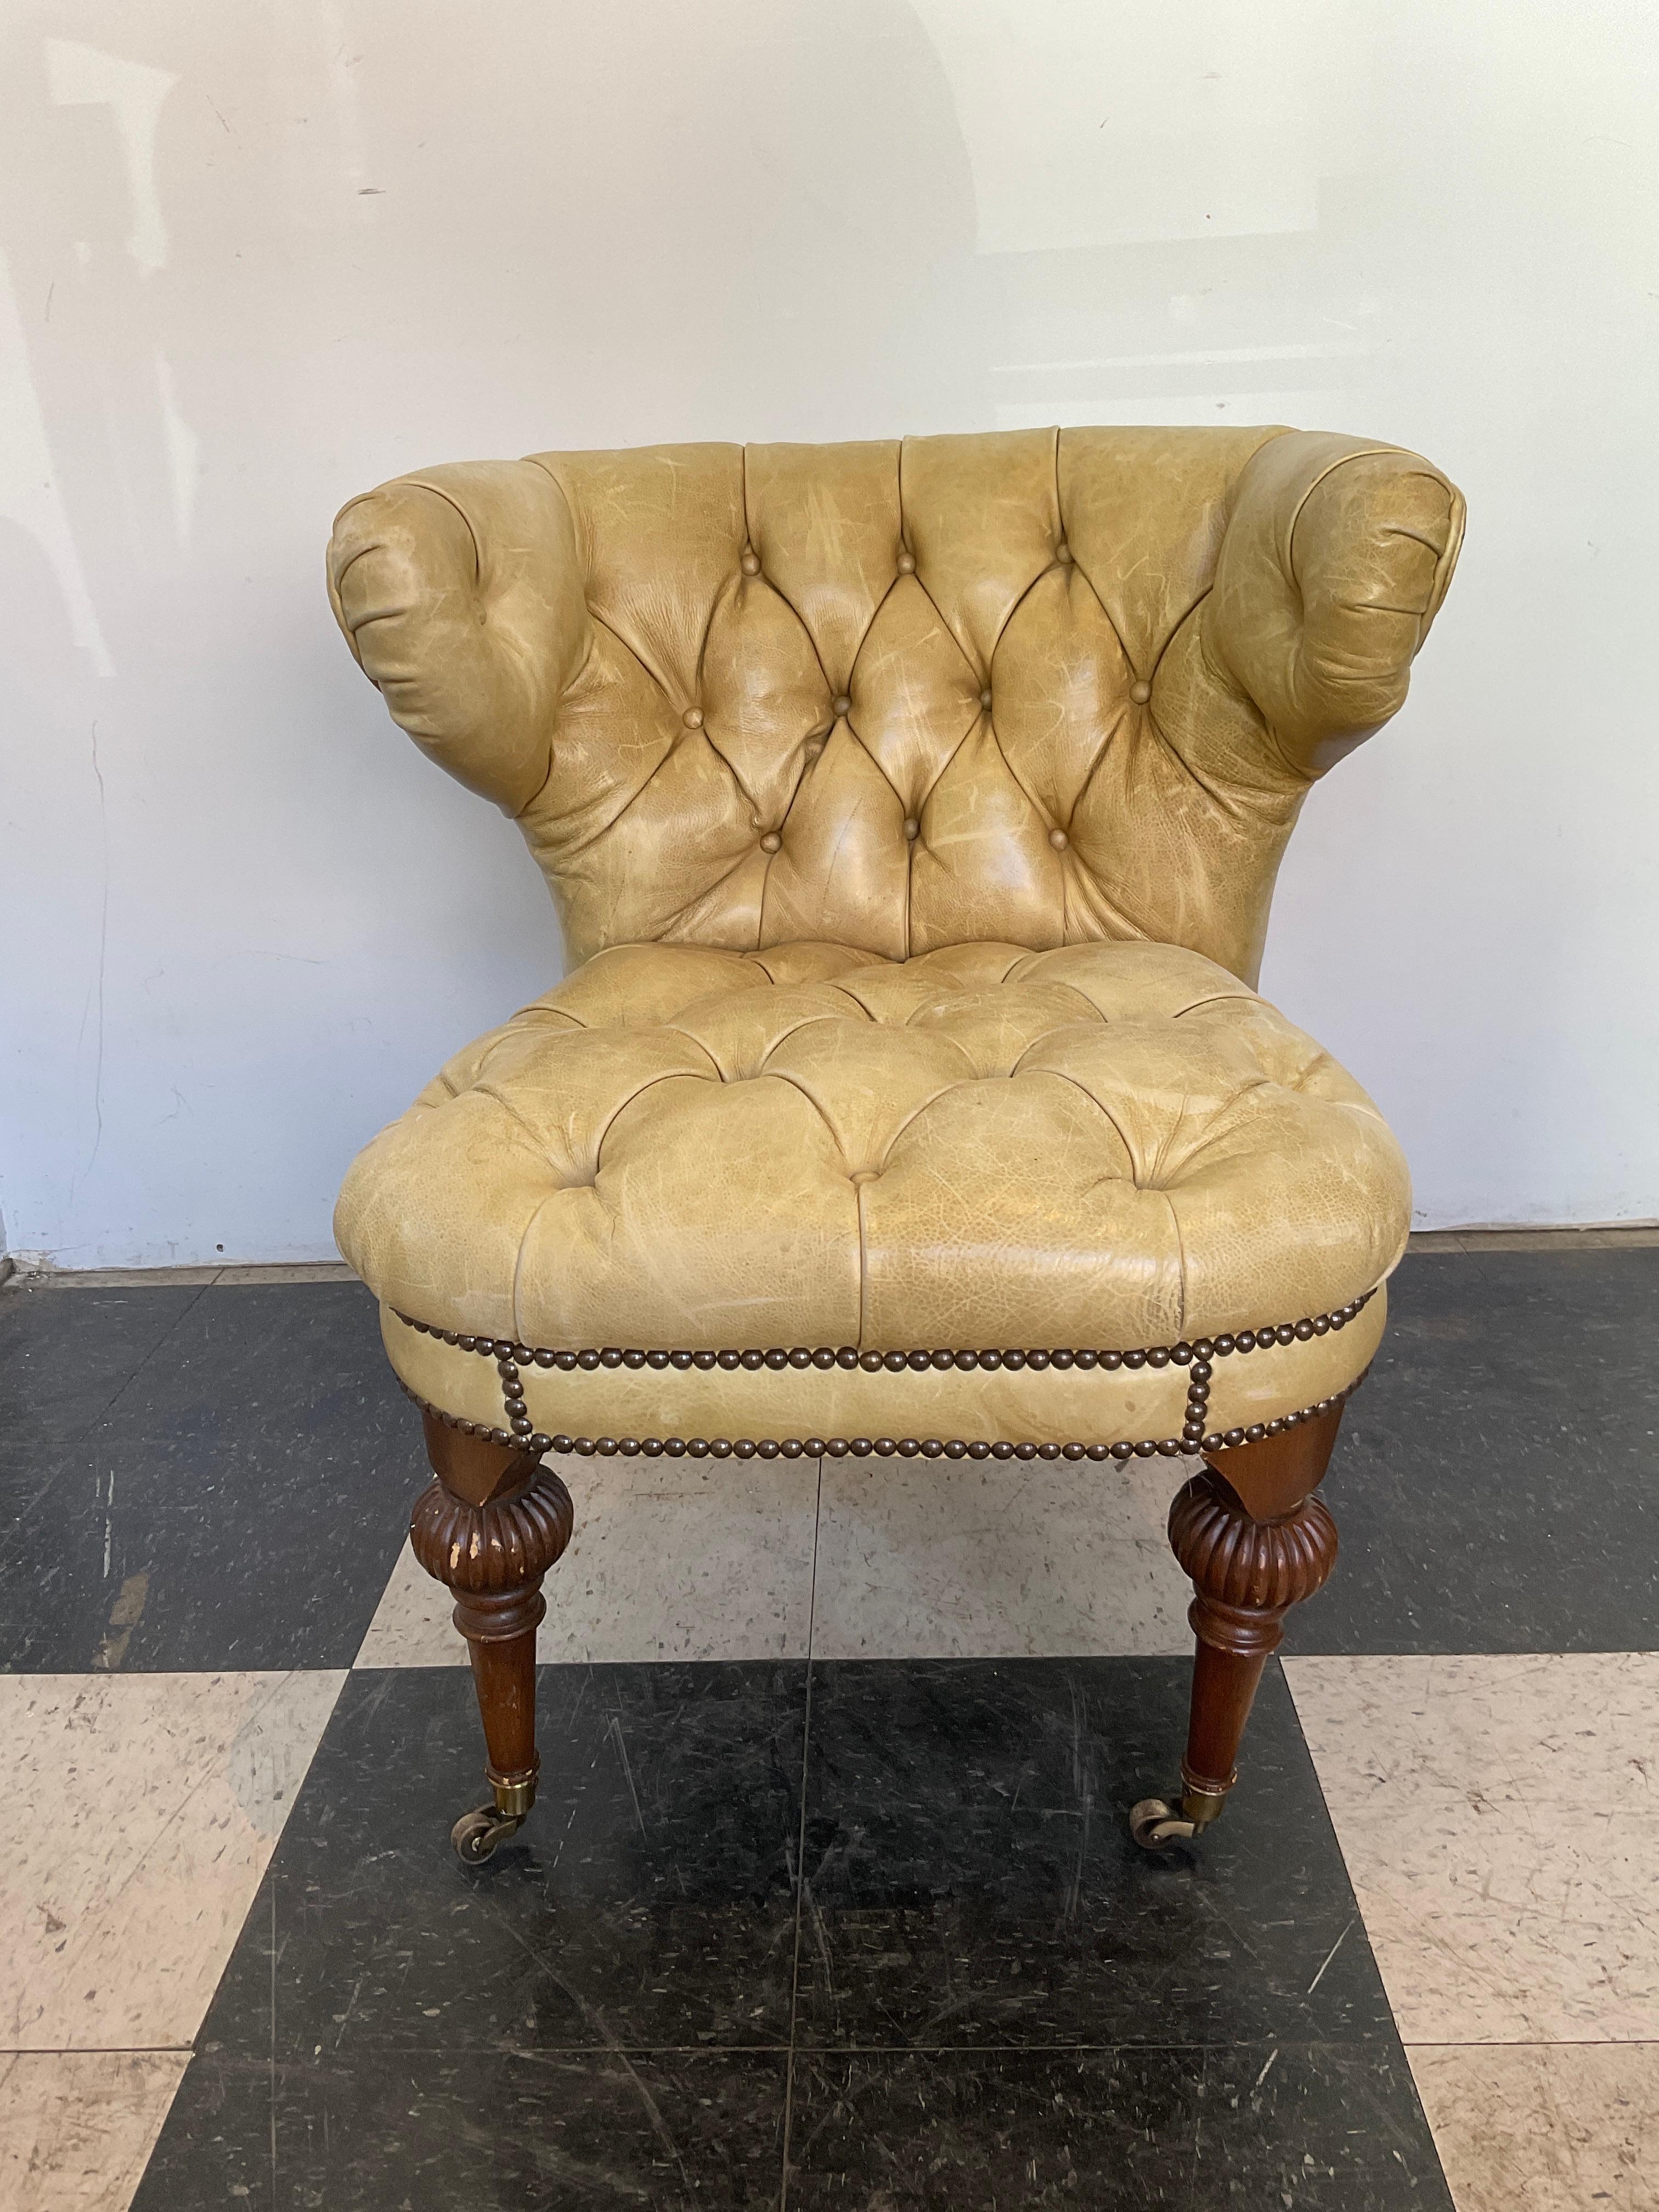 Tufted Leather Cockfighting Chair In Good Condition For Sale In Tarrytown, NY